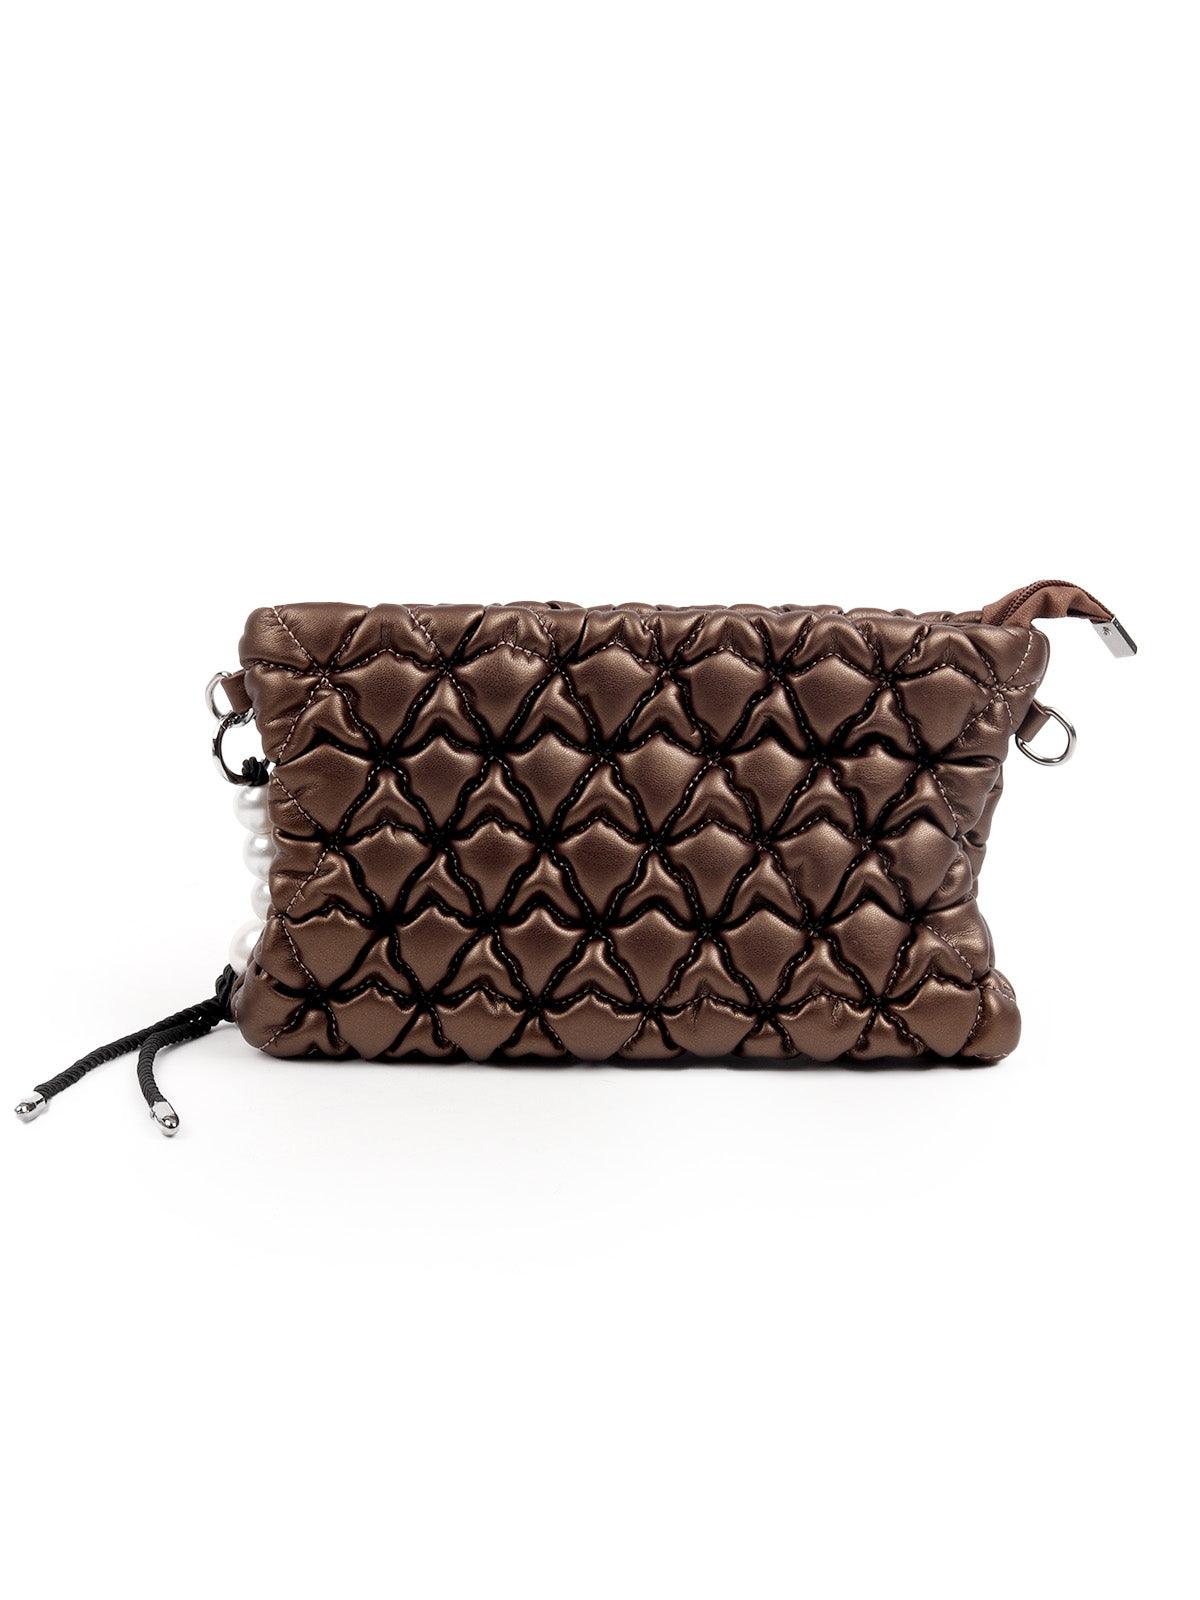 1% OFF on eZeeBags Beautiful Ladies Leather Clutch Purse Brown on Snapdeal  | PaisaWapas.com